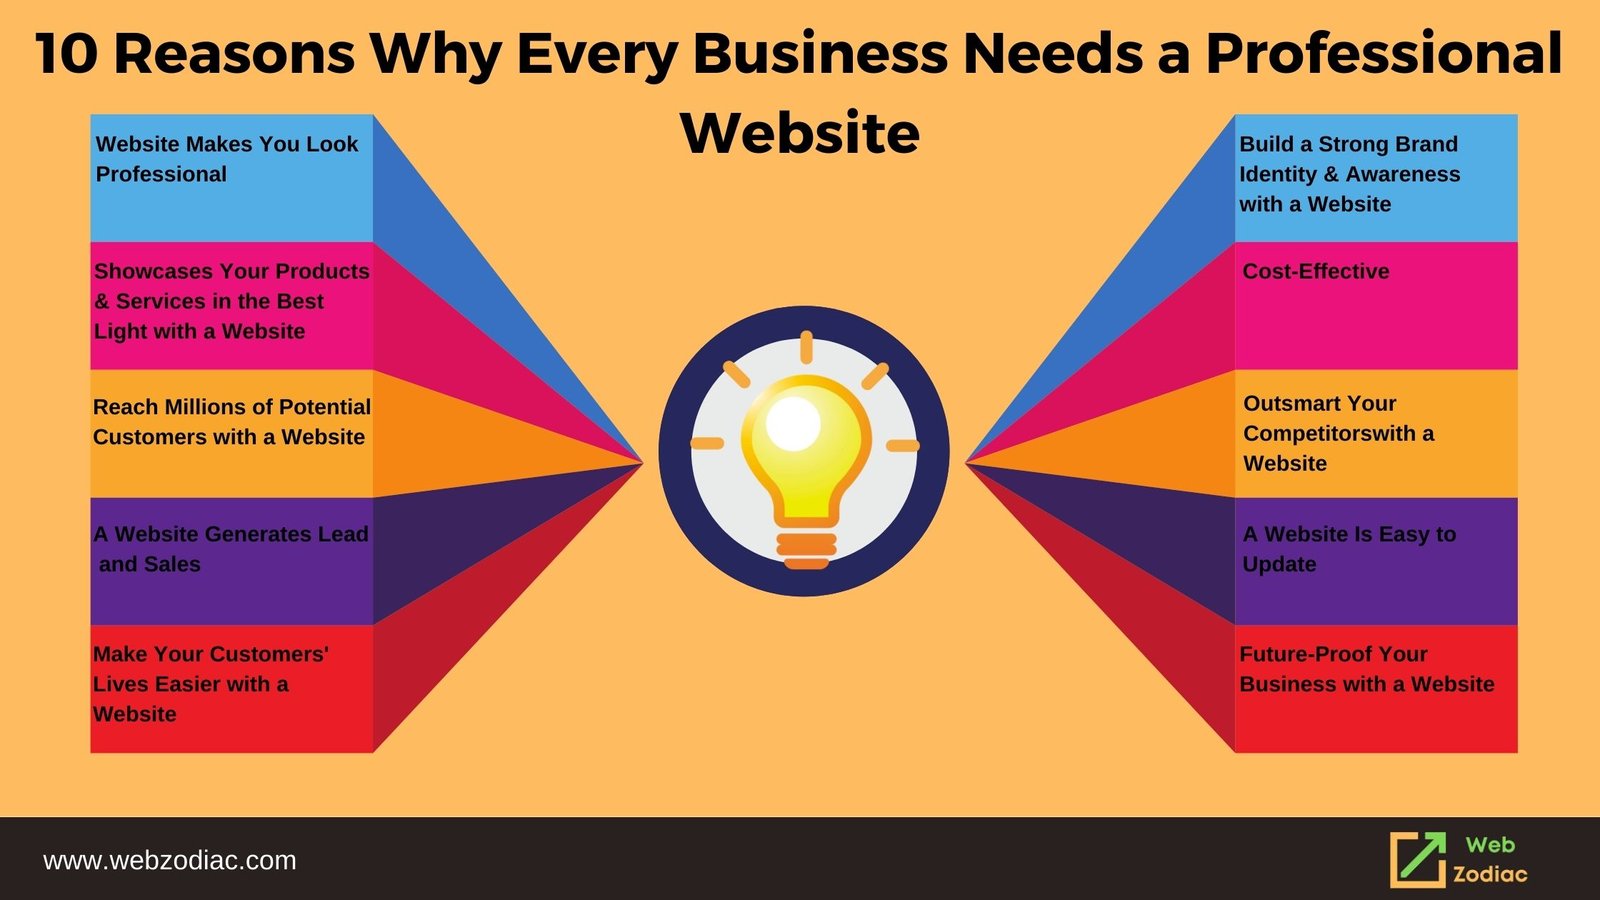 Reasons Why Every Business Needs a Professional Website